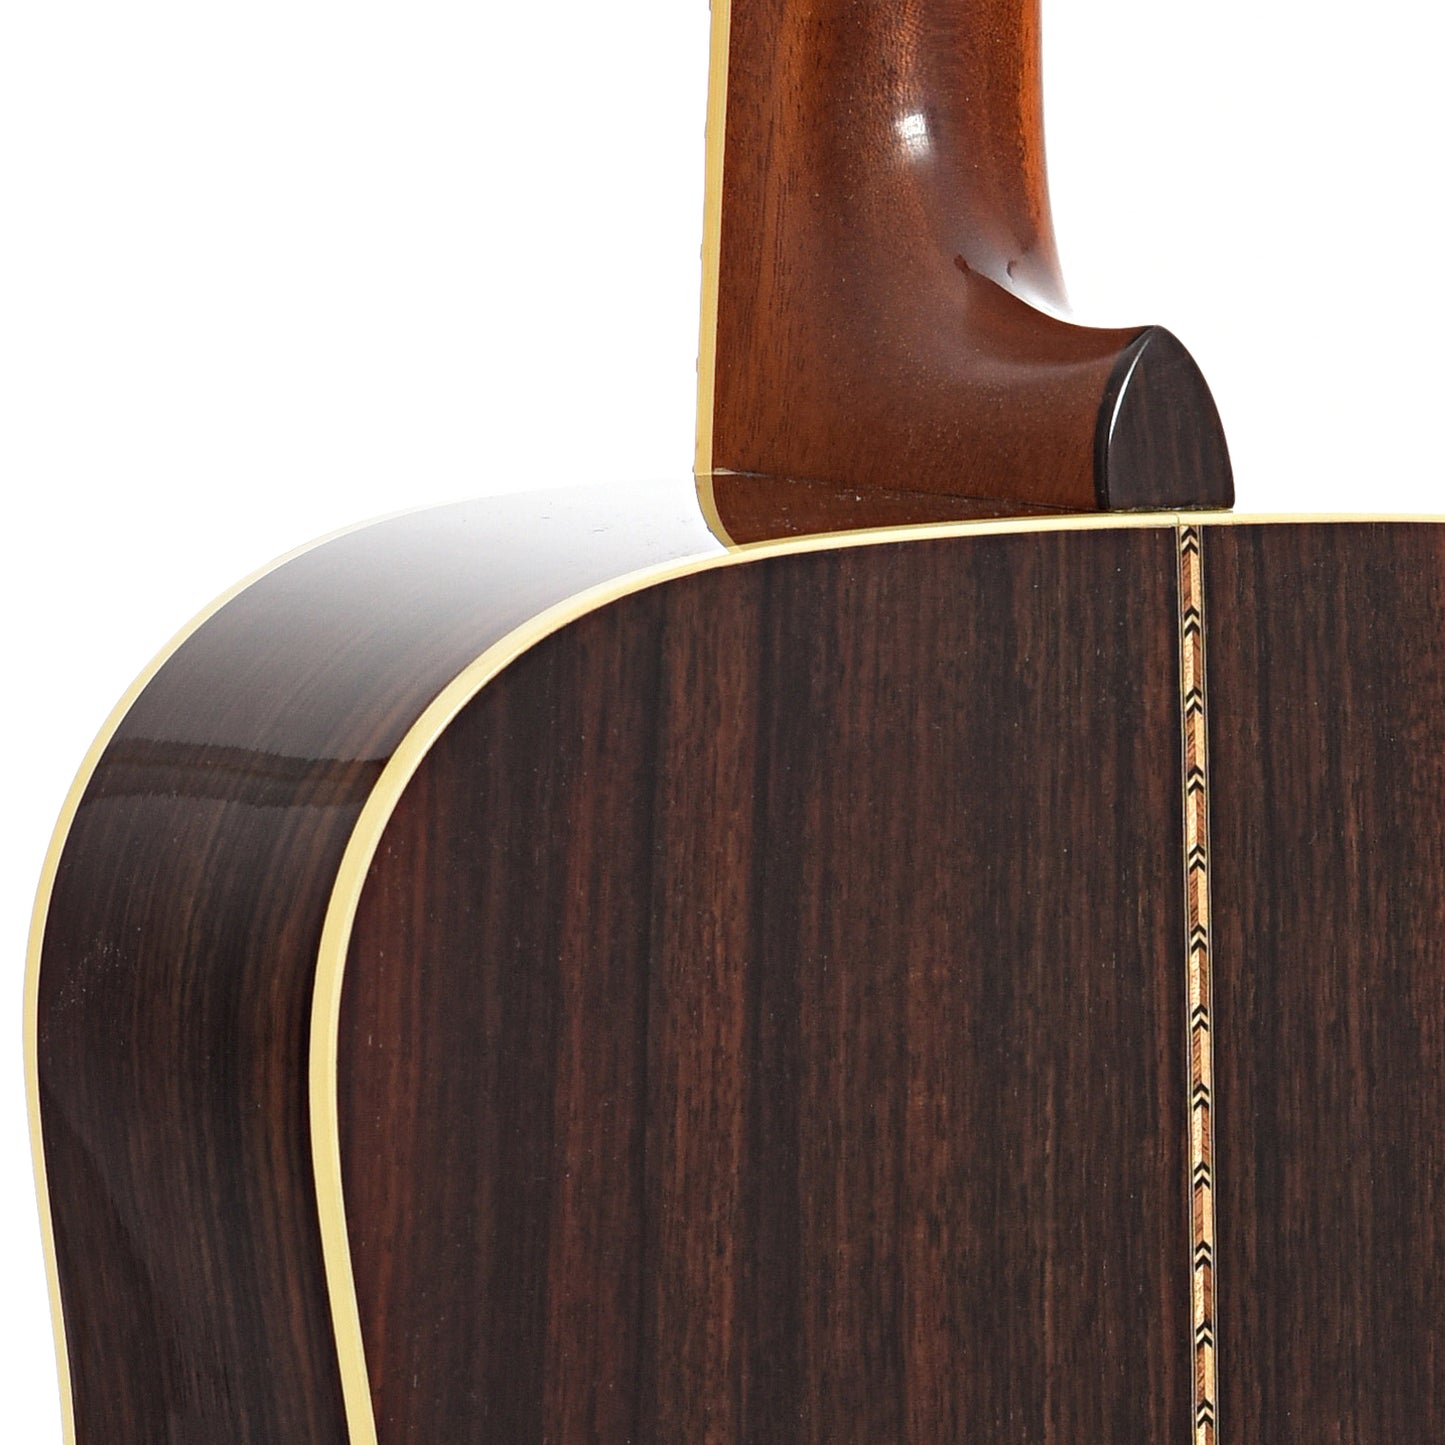 Heel of Gallagher G-70 Acoustic Guitar (2020)